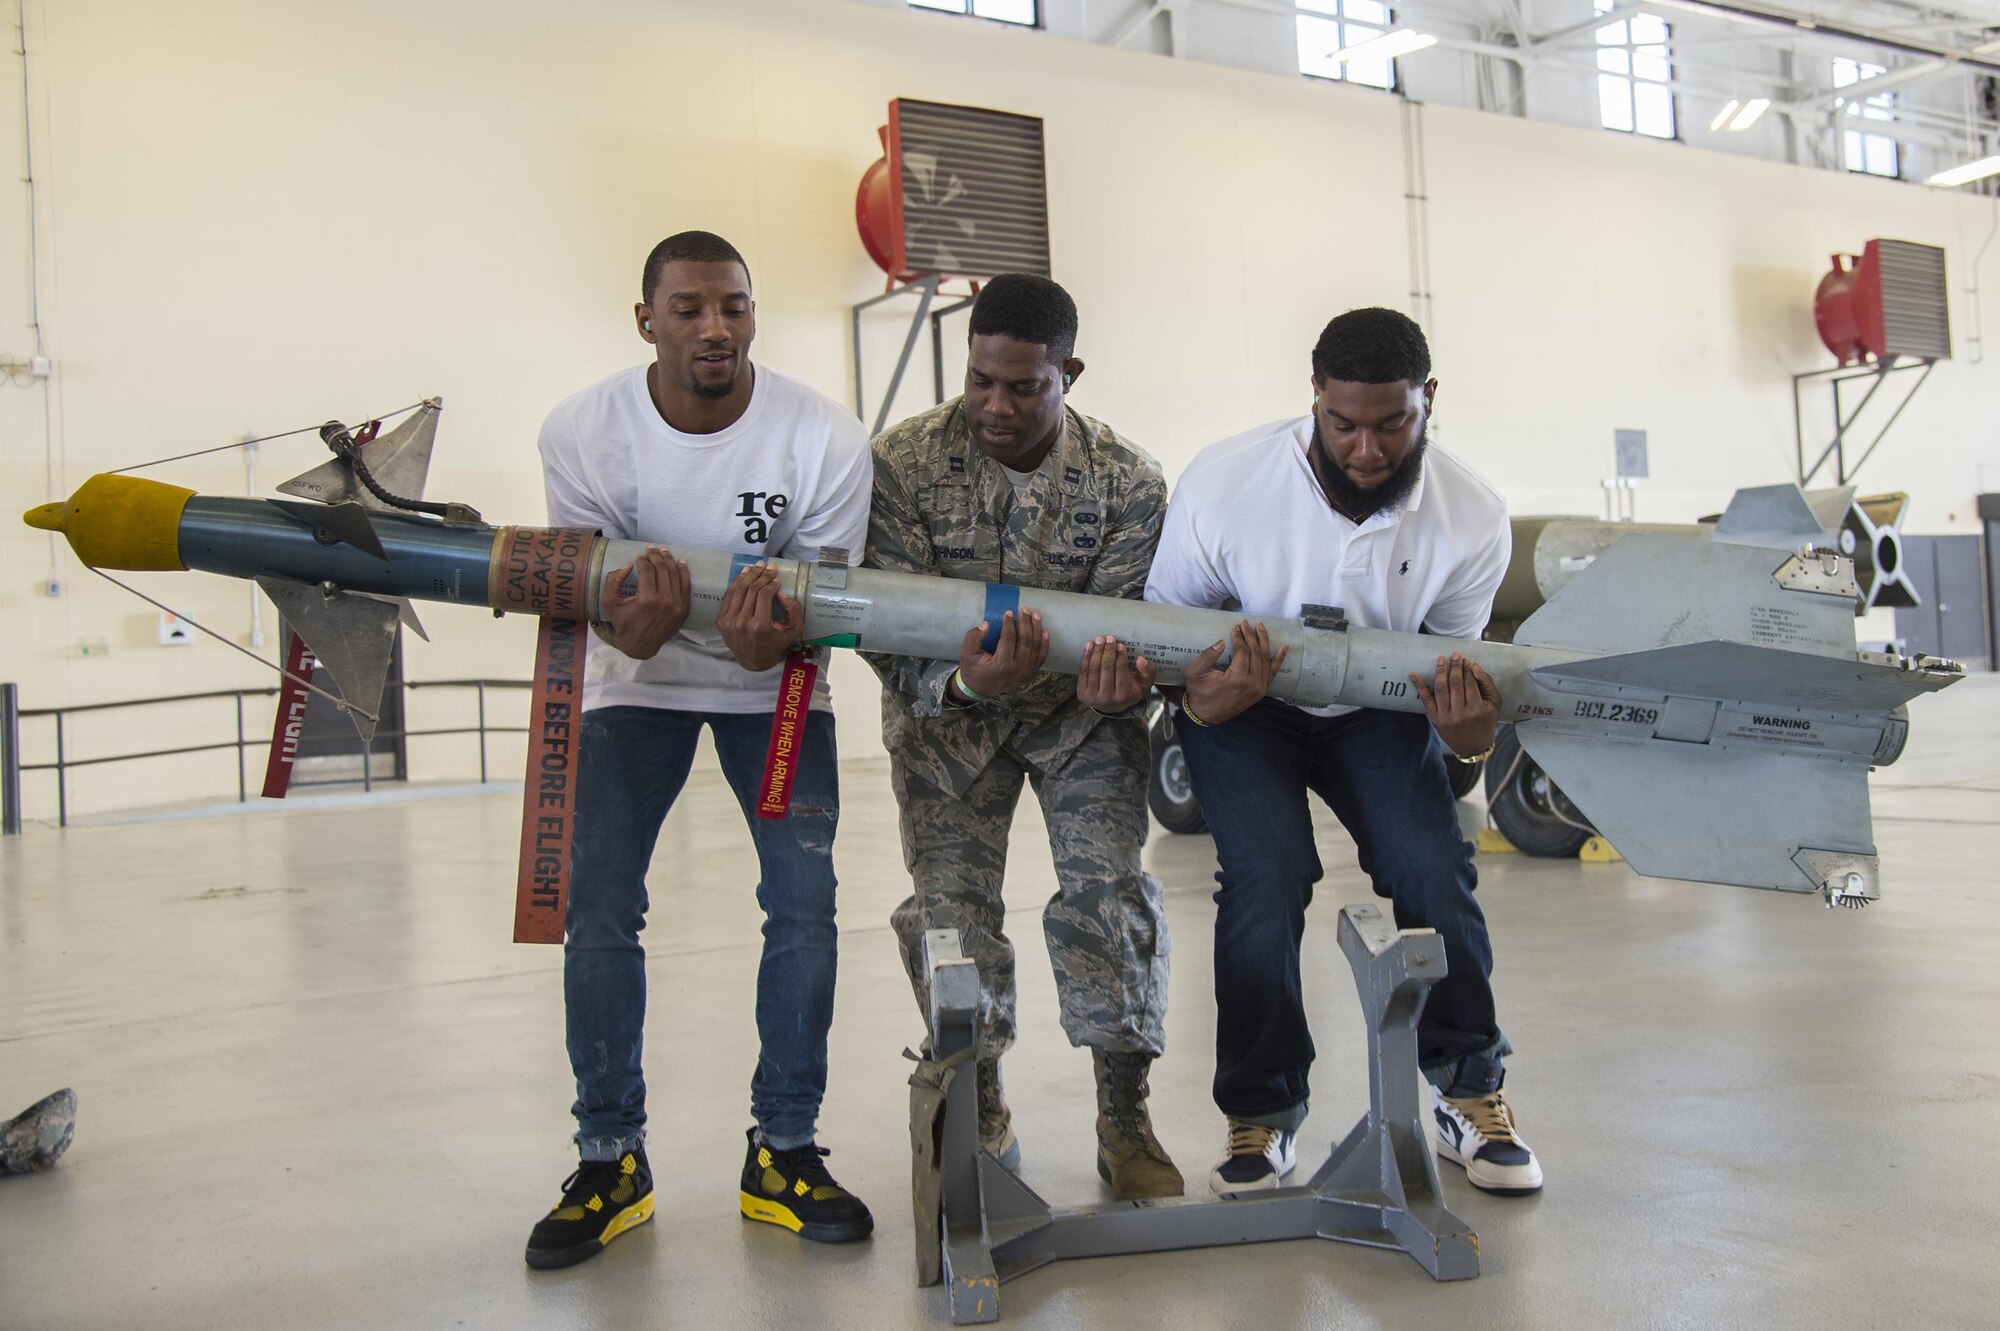 Malcolm Mitchell, left, New England Patriots’ wide receiver and Super Bowl LI Champion, Capt. Eric Johnson, 23d Civil Engineer Squadron commander, and James Rome, former Pittsburgh Steeler tight end, lift an AIM 9 Sidewinder II missile during Mitchell’s visit March 7, 2017, at Moody Air Force Base, Ga. Mitchell, a Valdosta native, got a glimpse of a typical day in the life of Moody Airmen. Mitchell also spent time with Airmen and signed autographs for local Patriots’ fans during his visit. (U.S. Air Force photo by Senior Airman Ceaira Young)